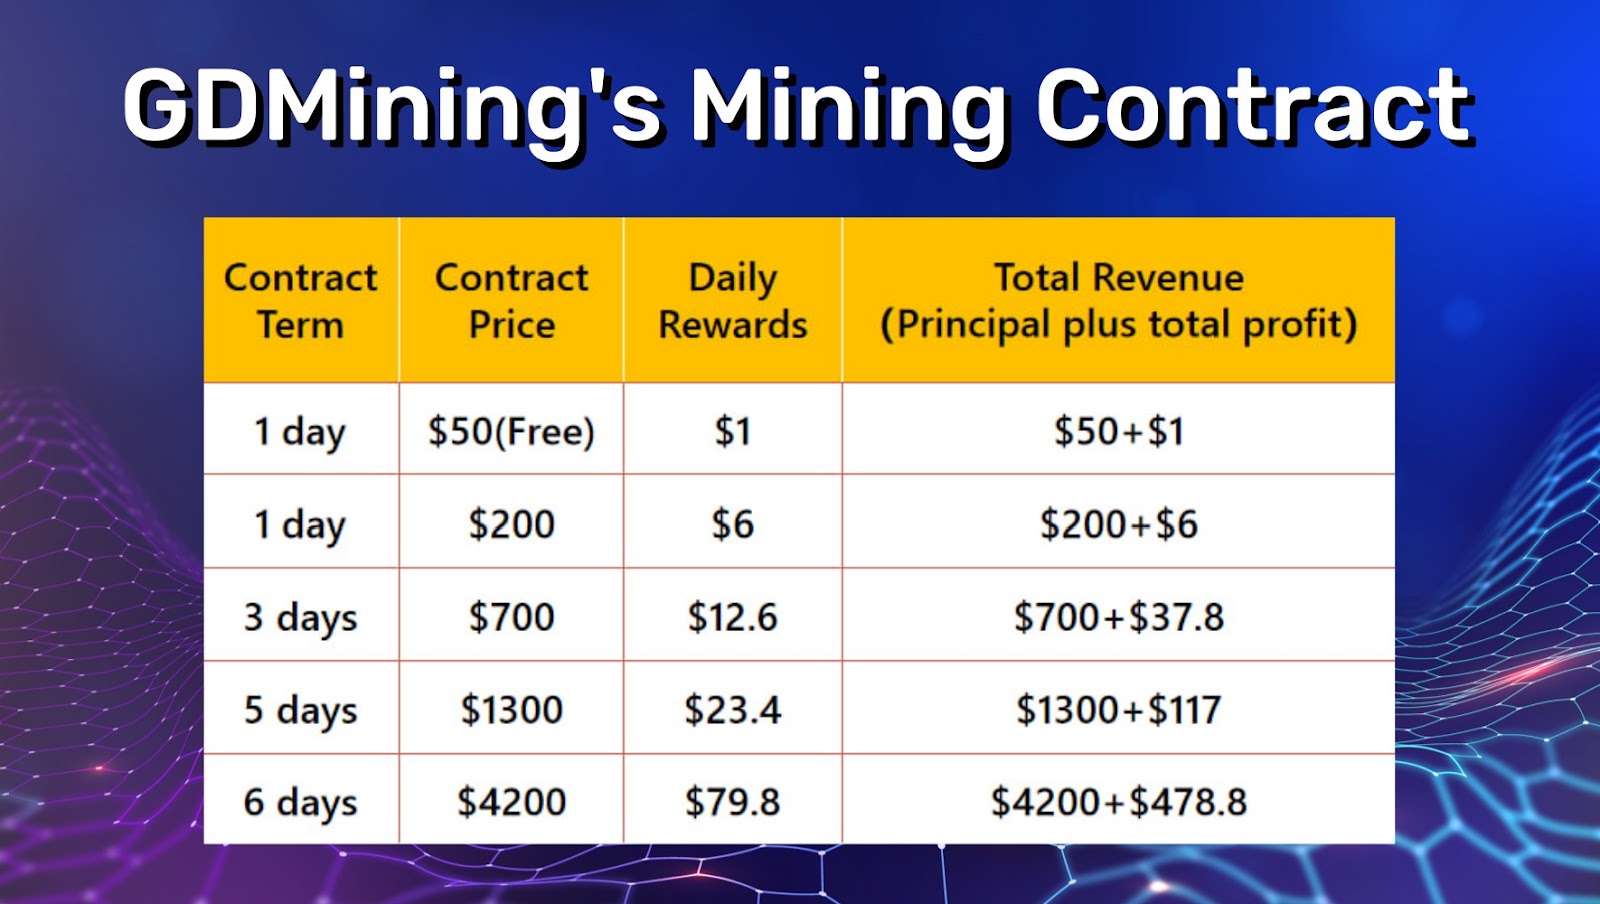 GDMining Mining Contract